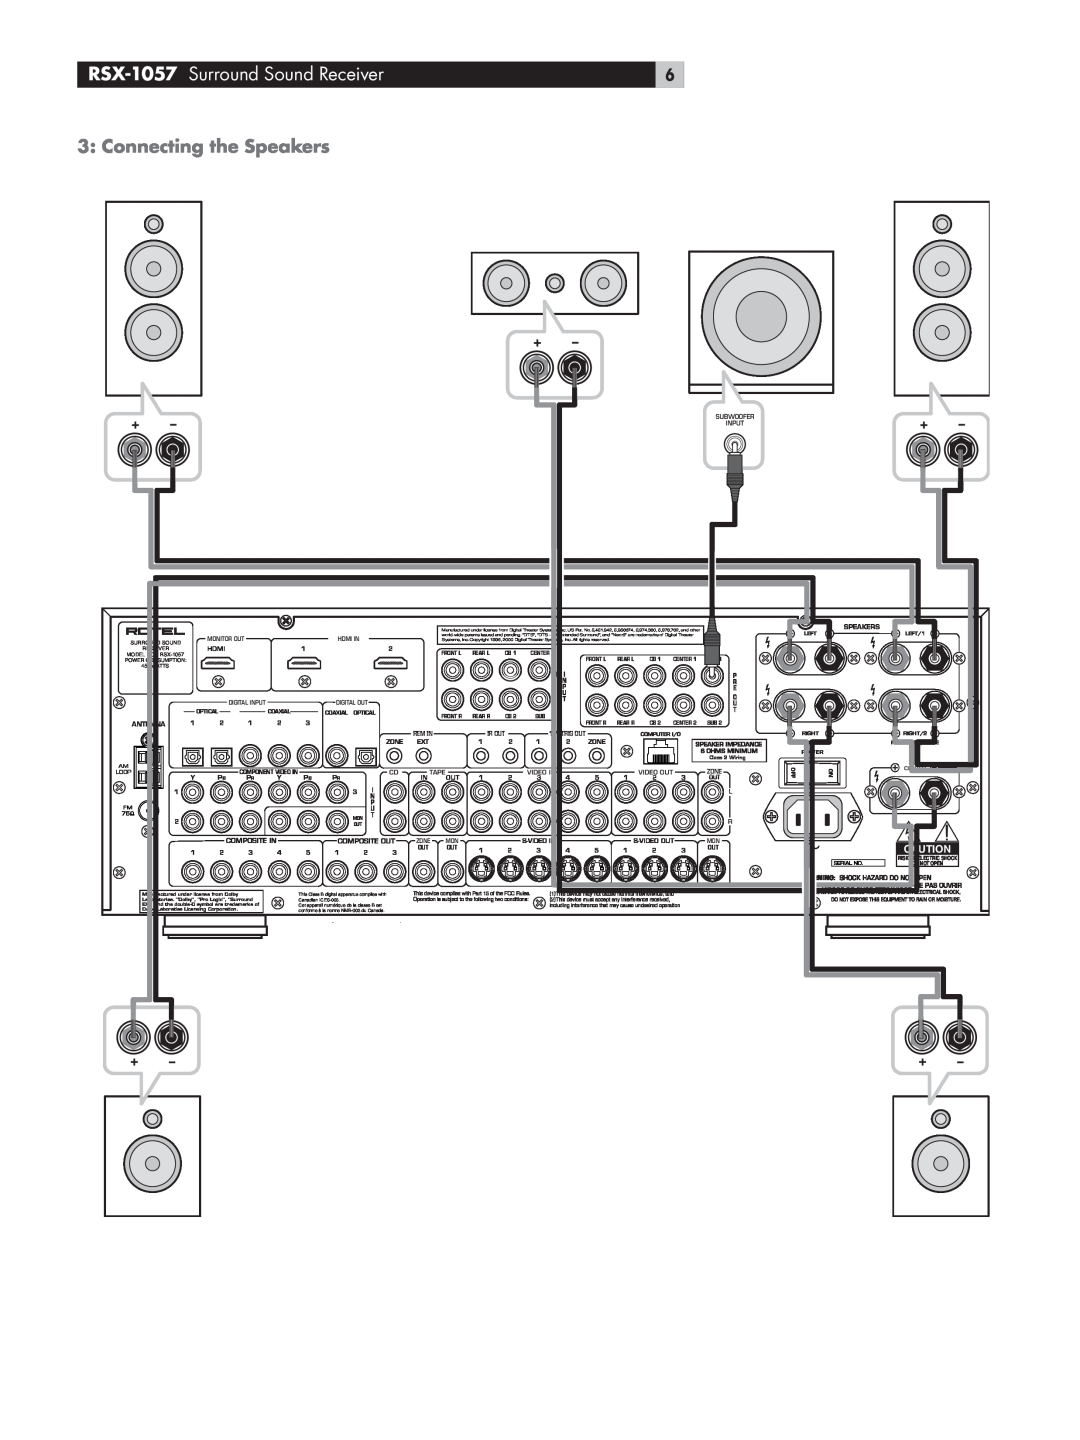 Rotel owner manual 3: Connecting the Speakers, RSX-1057 Surround Sound Receiver 